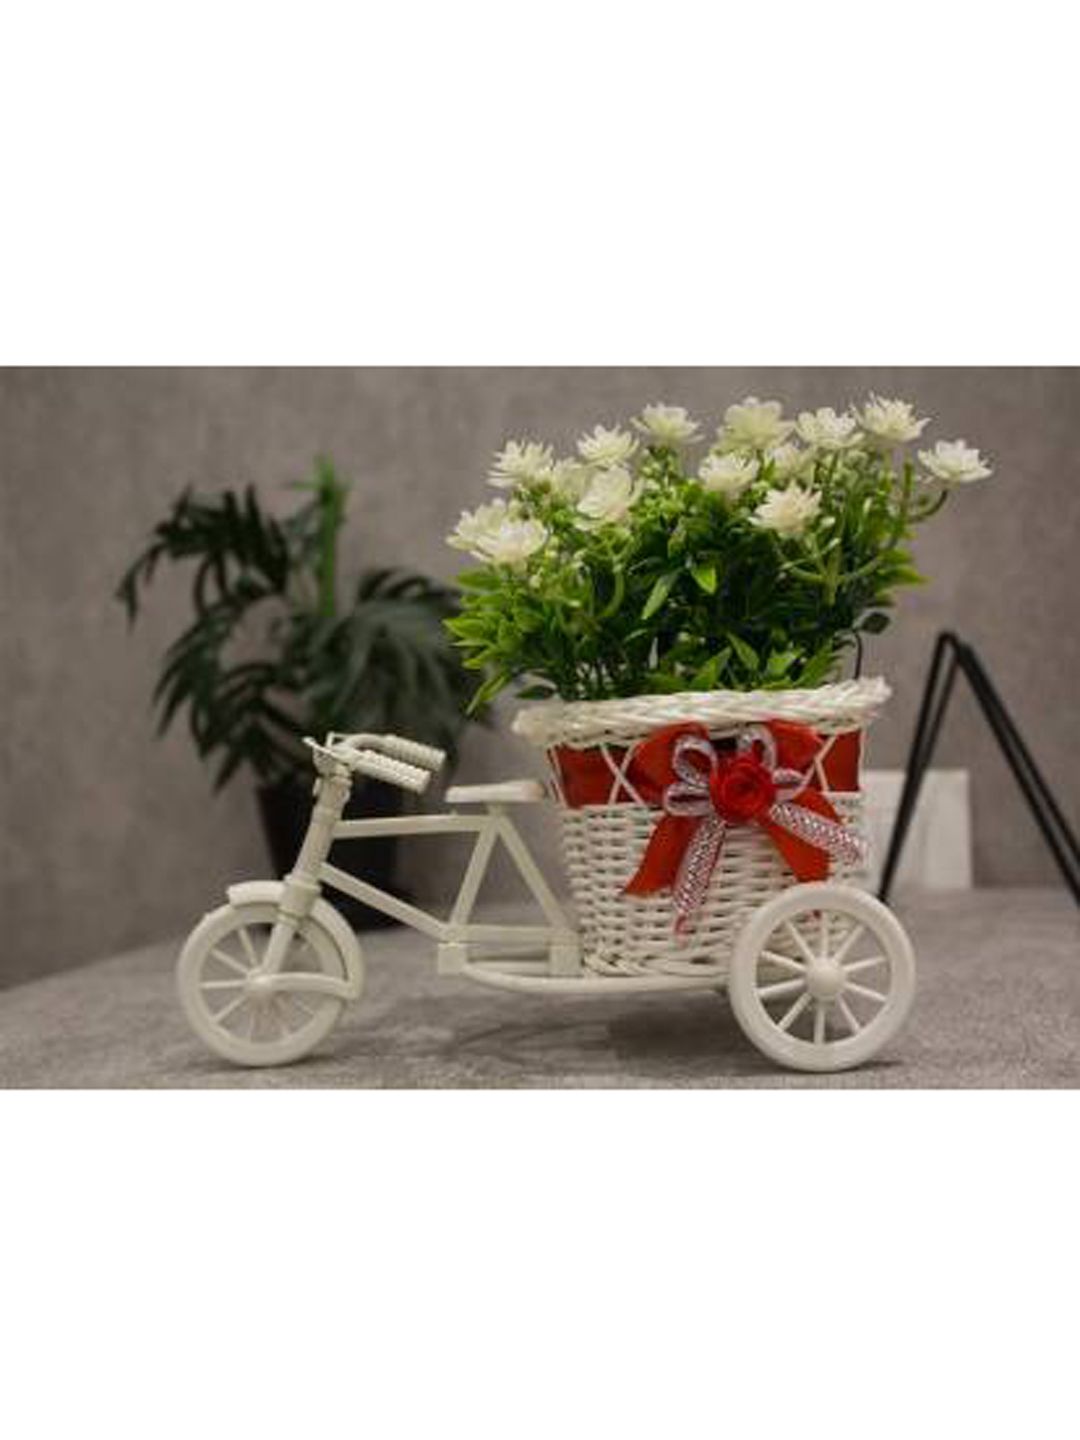 PolliNation Cream Colored Cycle Shape Flower Vase Price in India